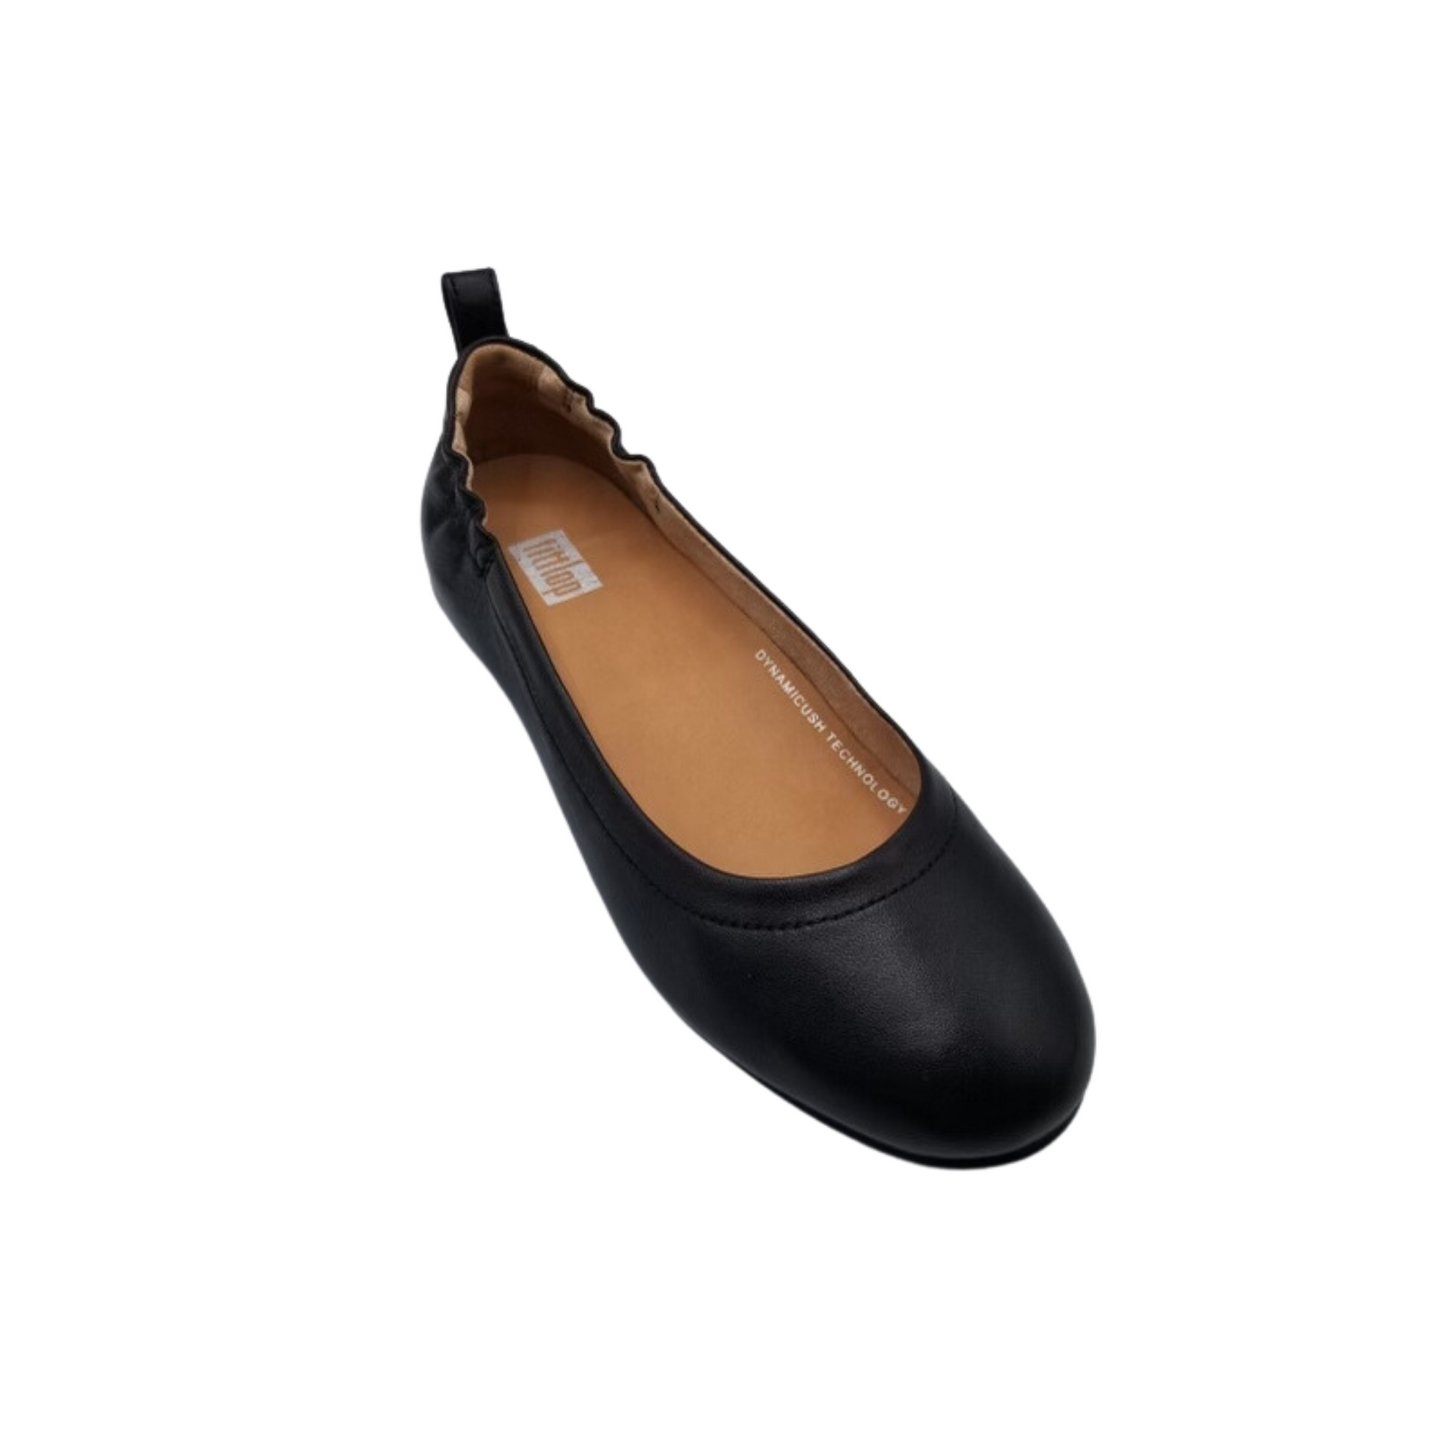 The Fit Flop Allegro Ballet Flat features a luxurious leather construction along with a robust rubber sole.